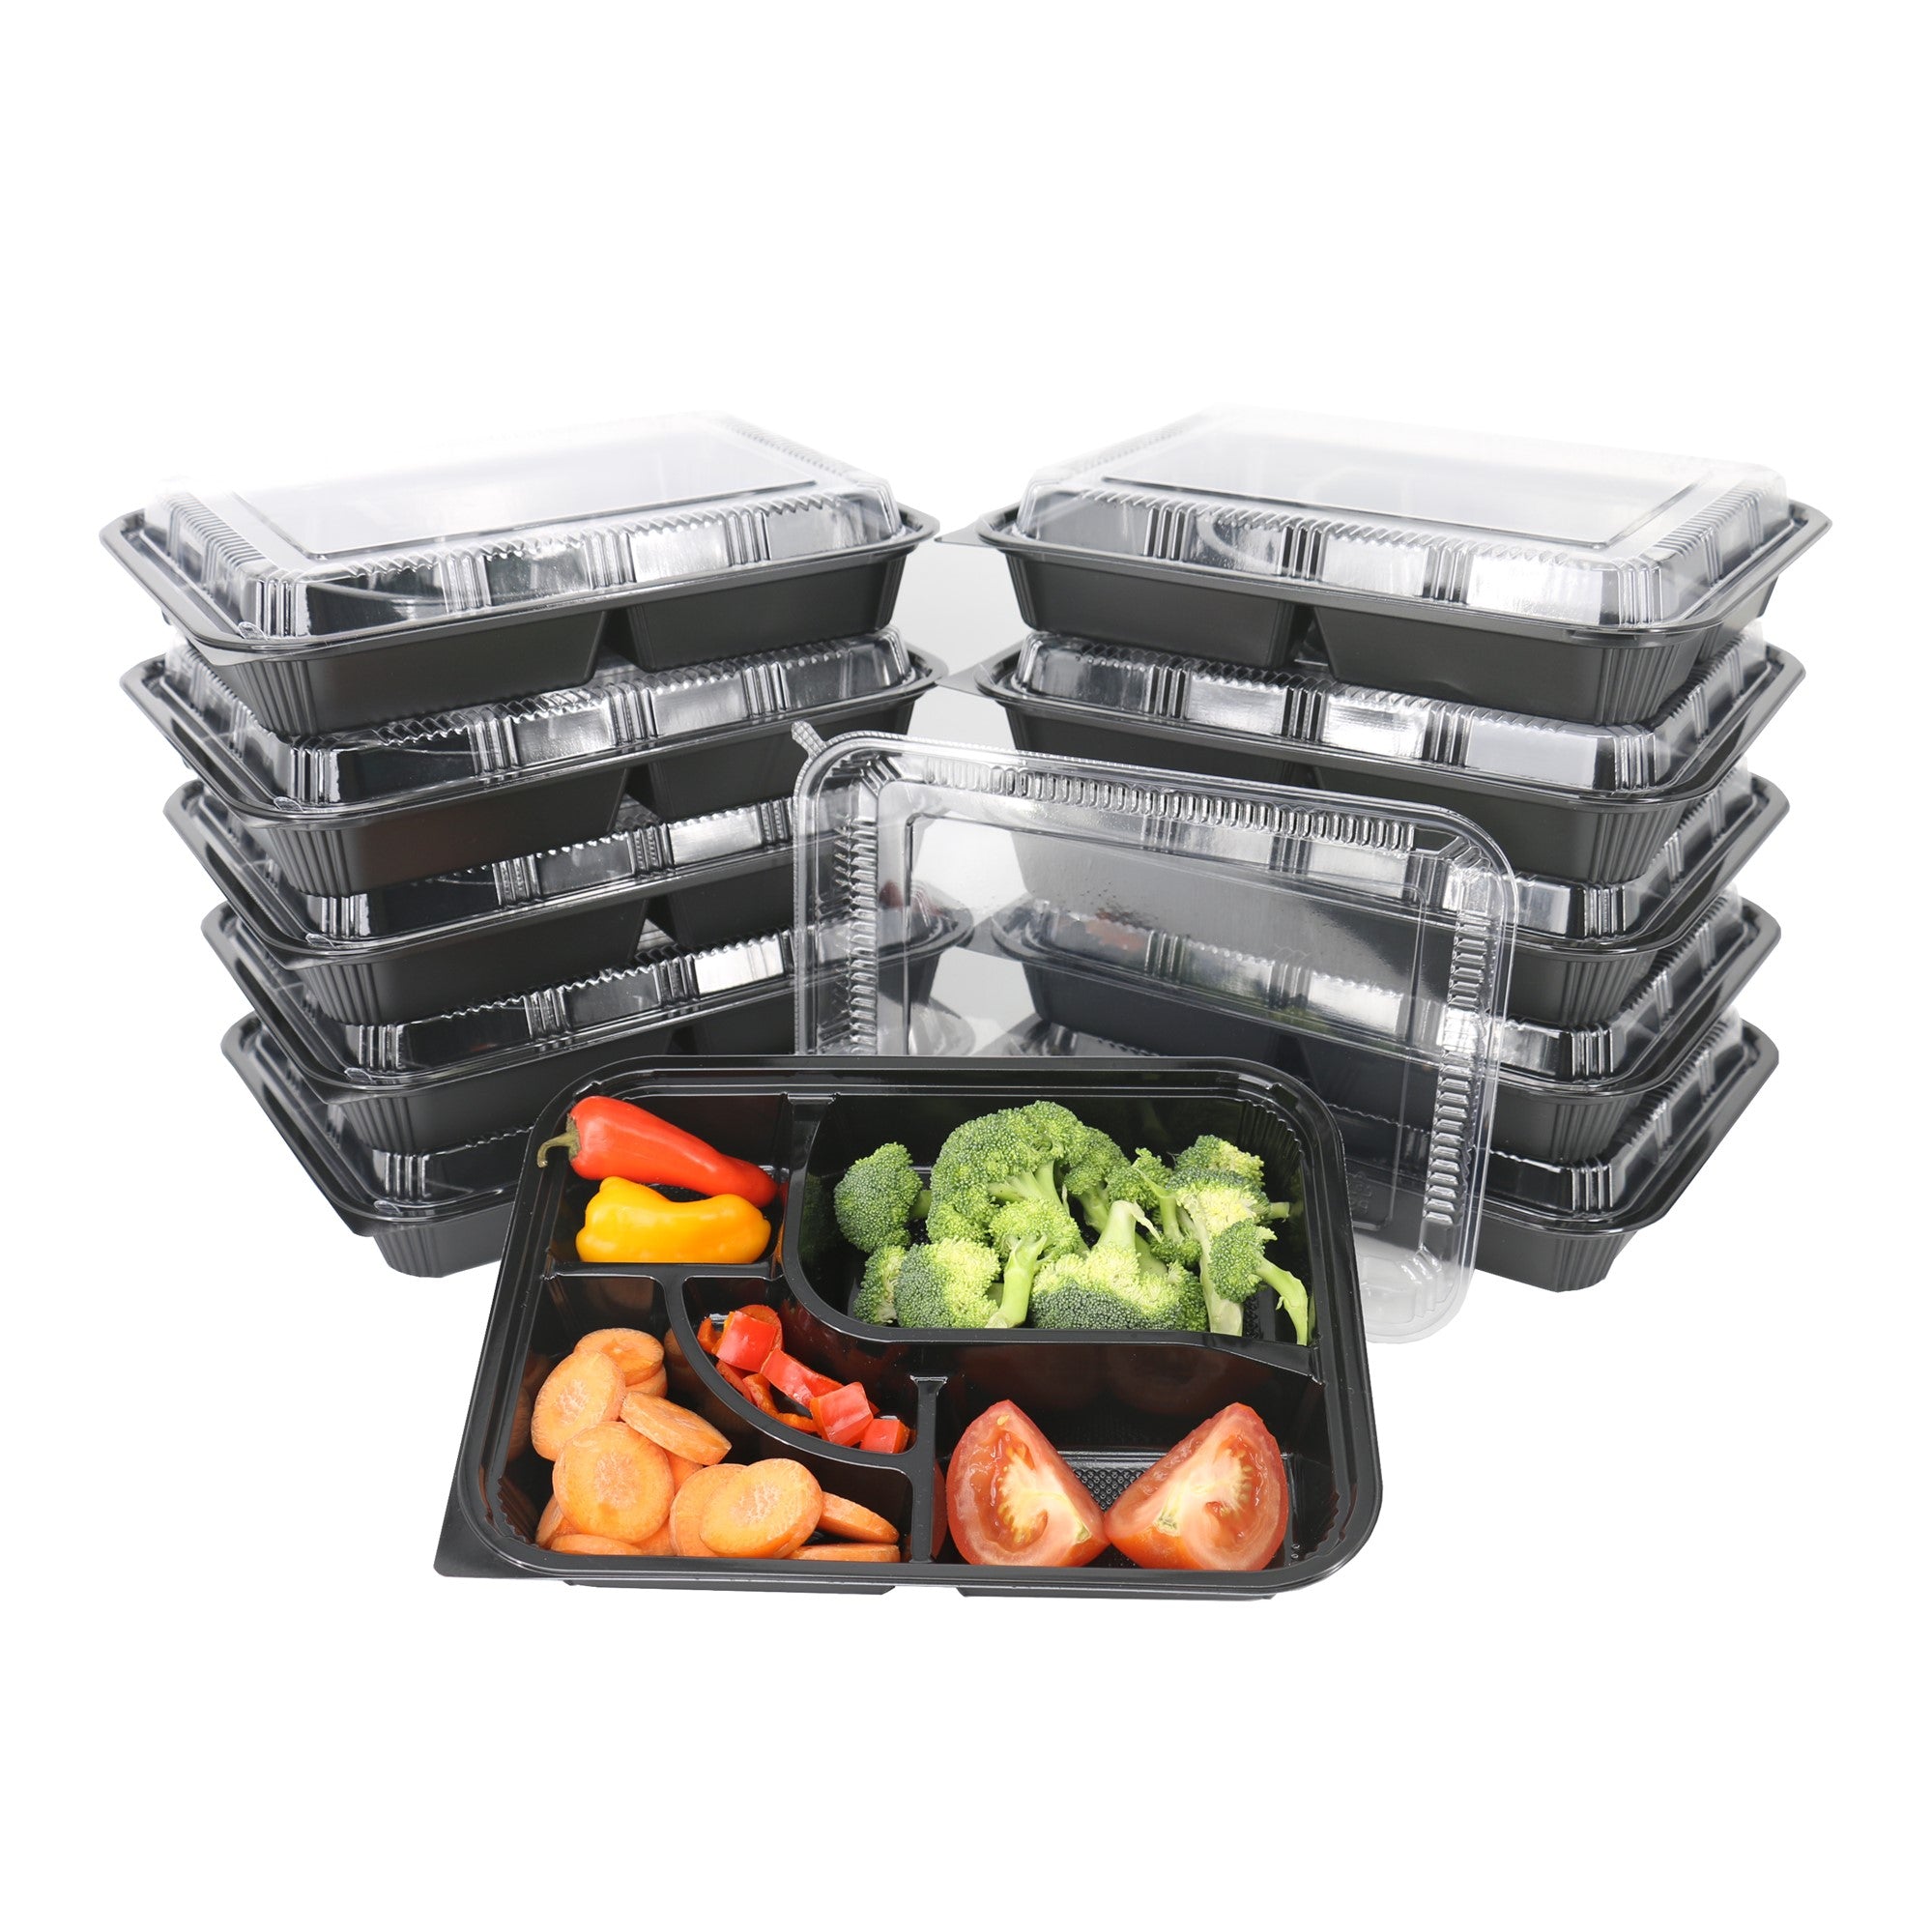 Takeout/To-go Container KS-84 Bento Box with Flat Lid (400/Case)